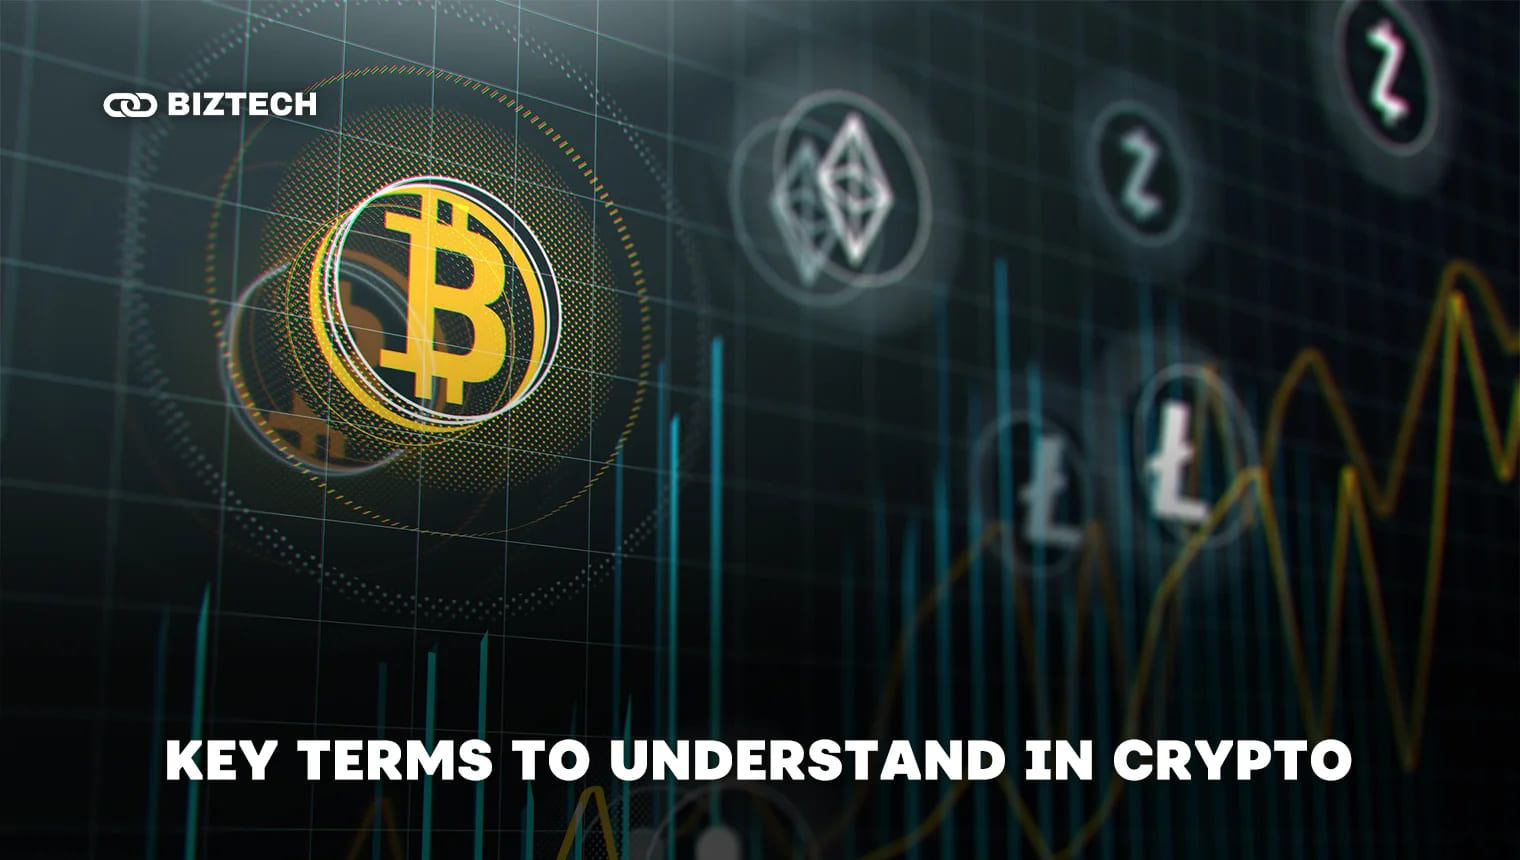 Key Terms To Understand in Crypto